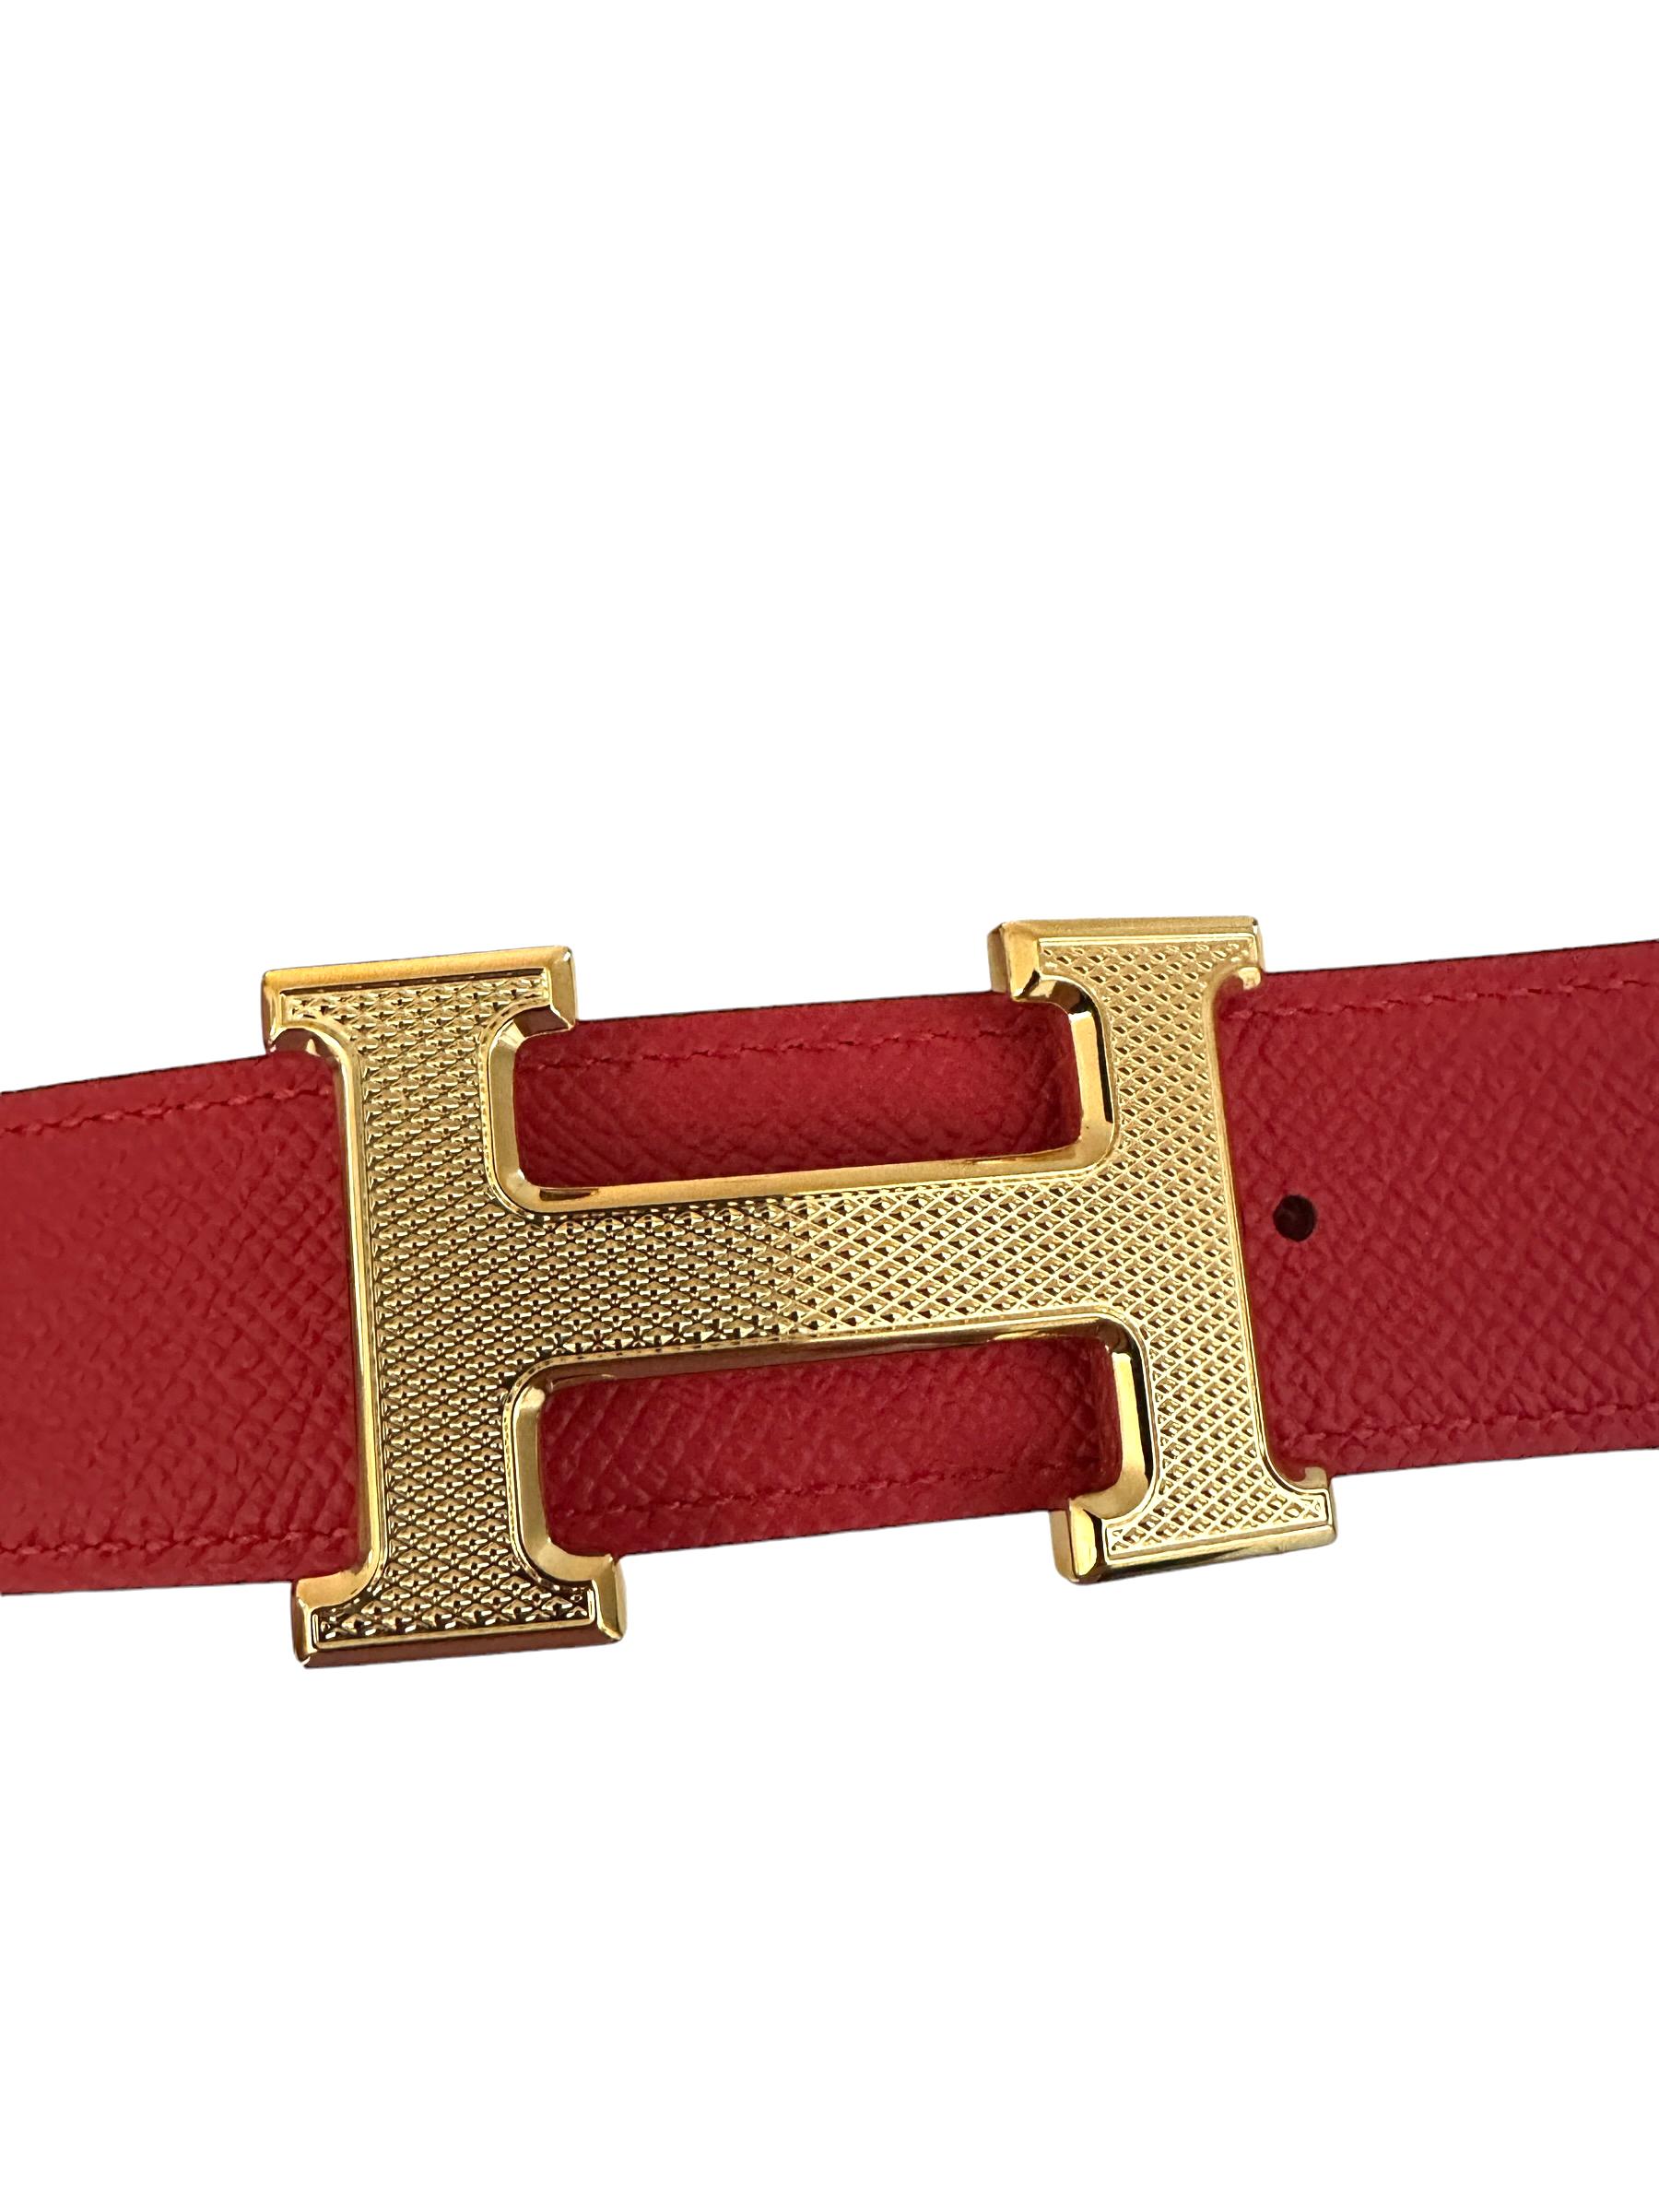 H belt buckle & Reversible leather strap 32 mm
The Hermes Constance Belt is a luxury fashion accessory made by the French high-end fashion brand Hermes. The Constance Belt was first introduced by Hermes in 1959, and it quickly became one of the